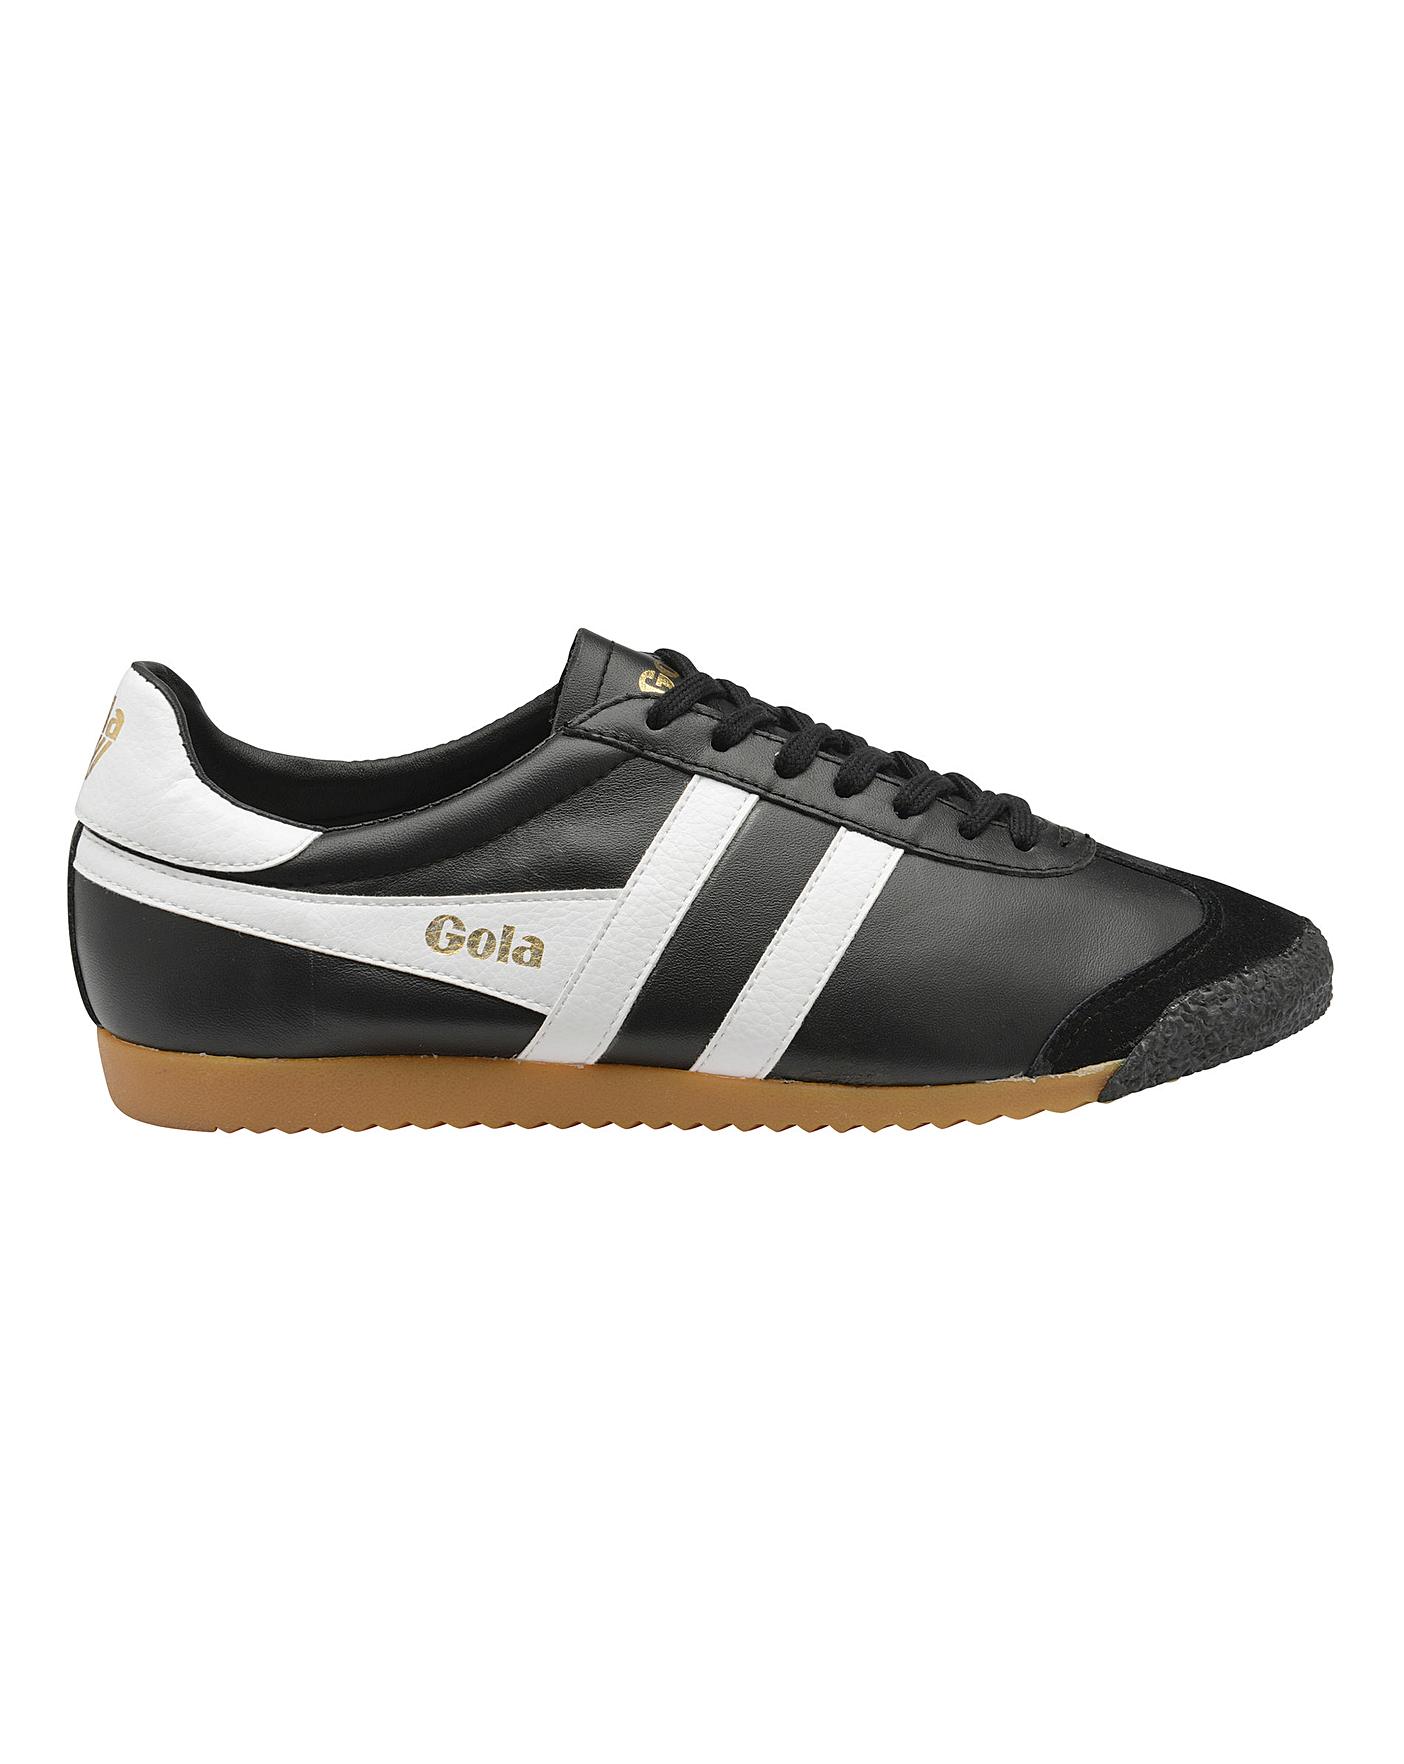 Gola Classics Harrier Trainers | Oxendales